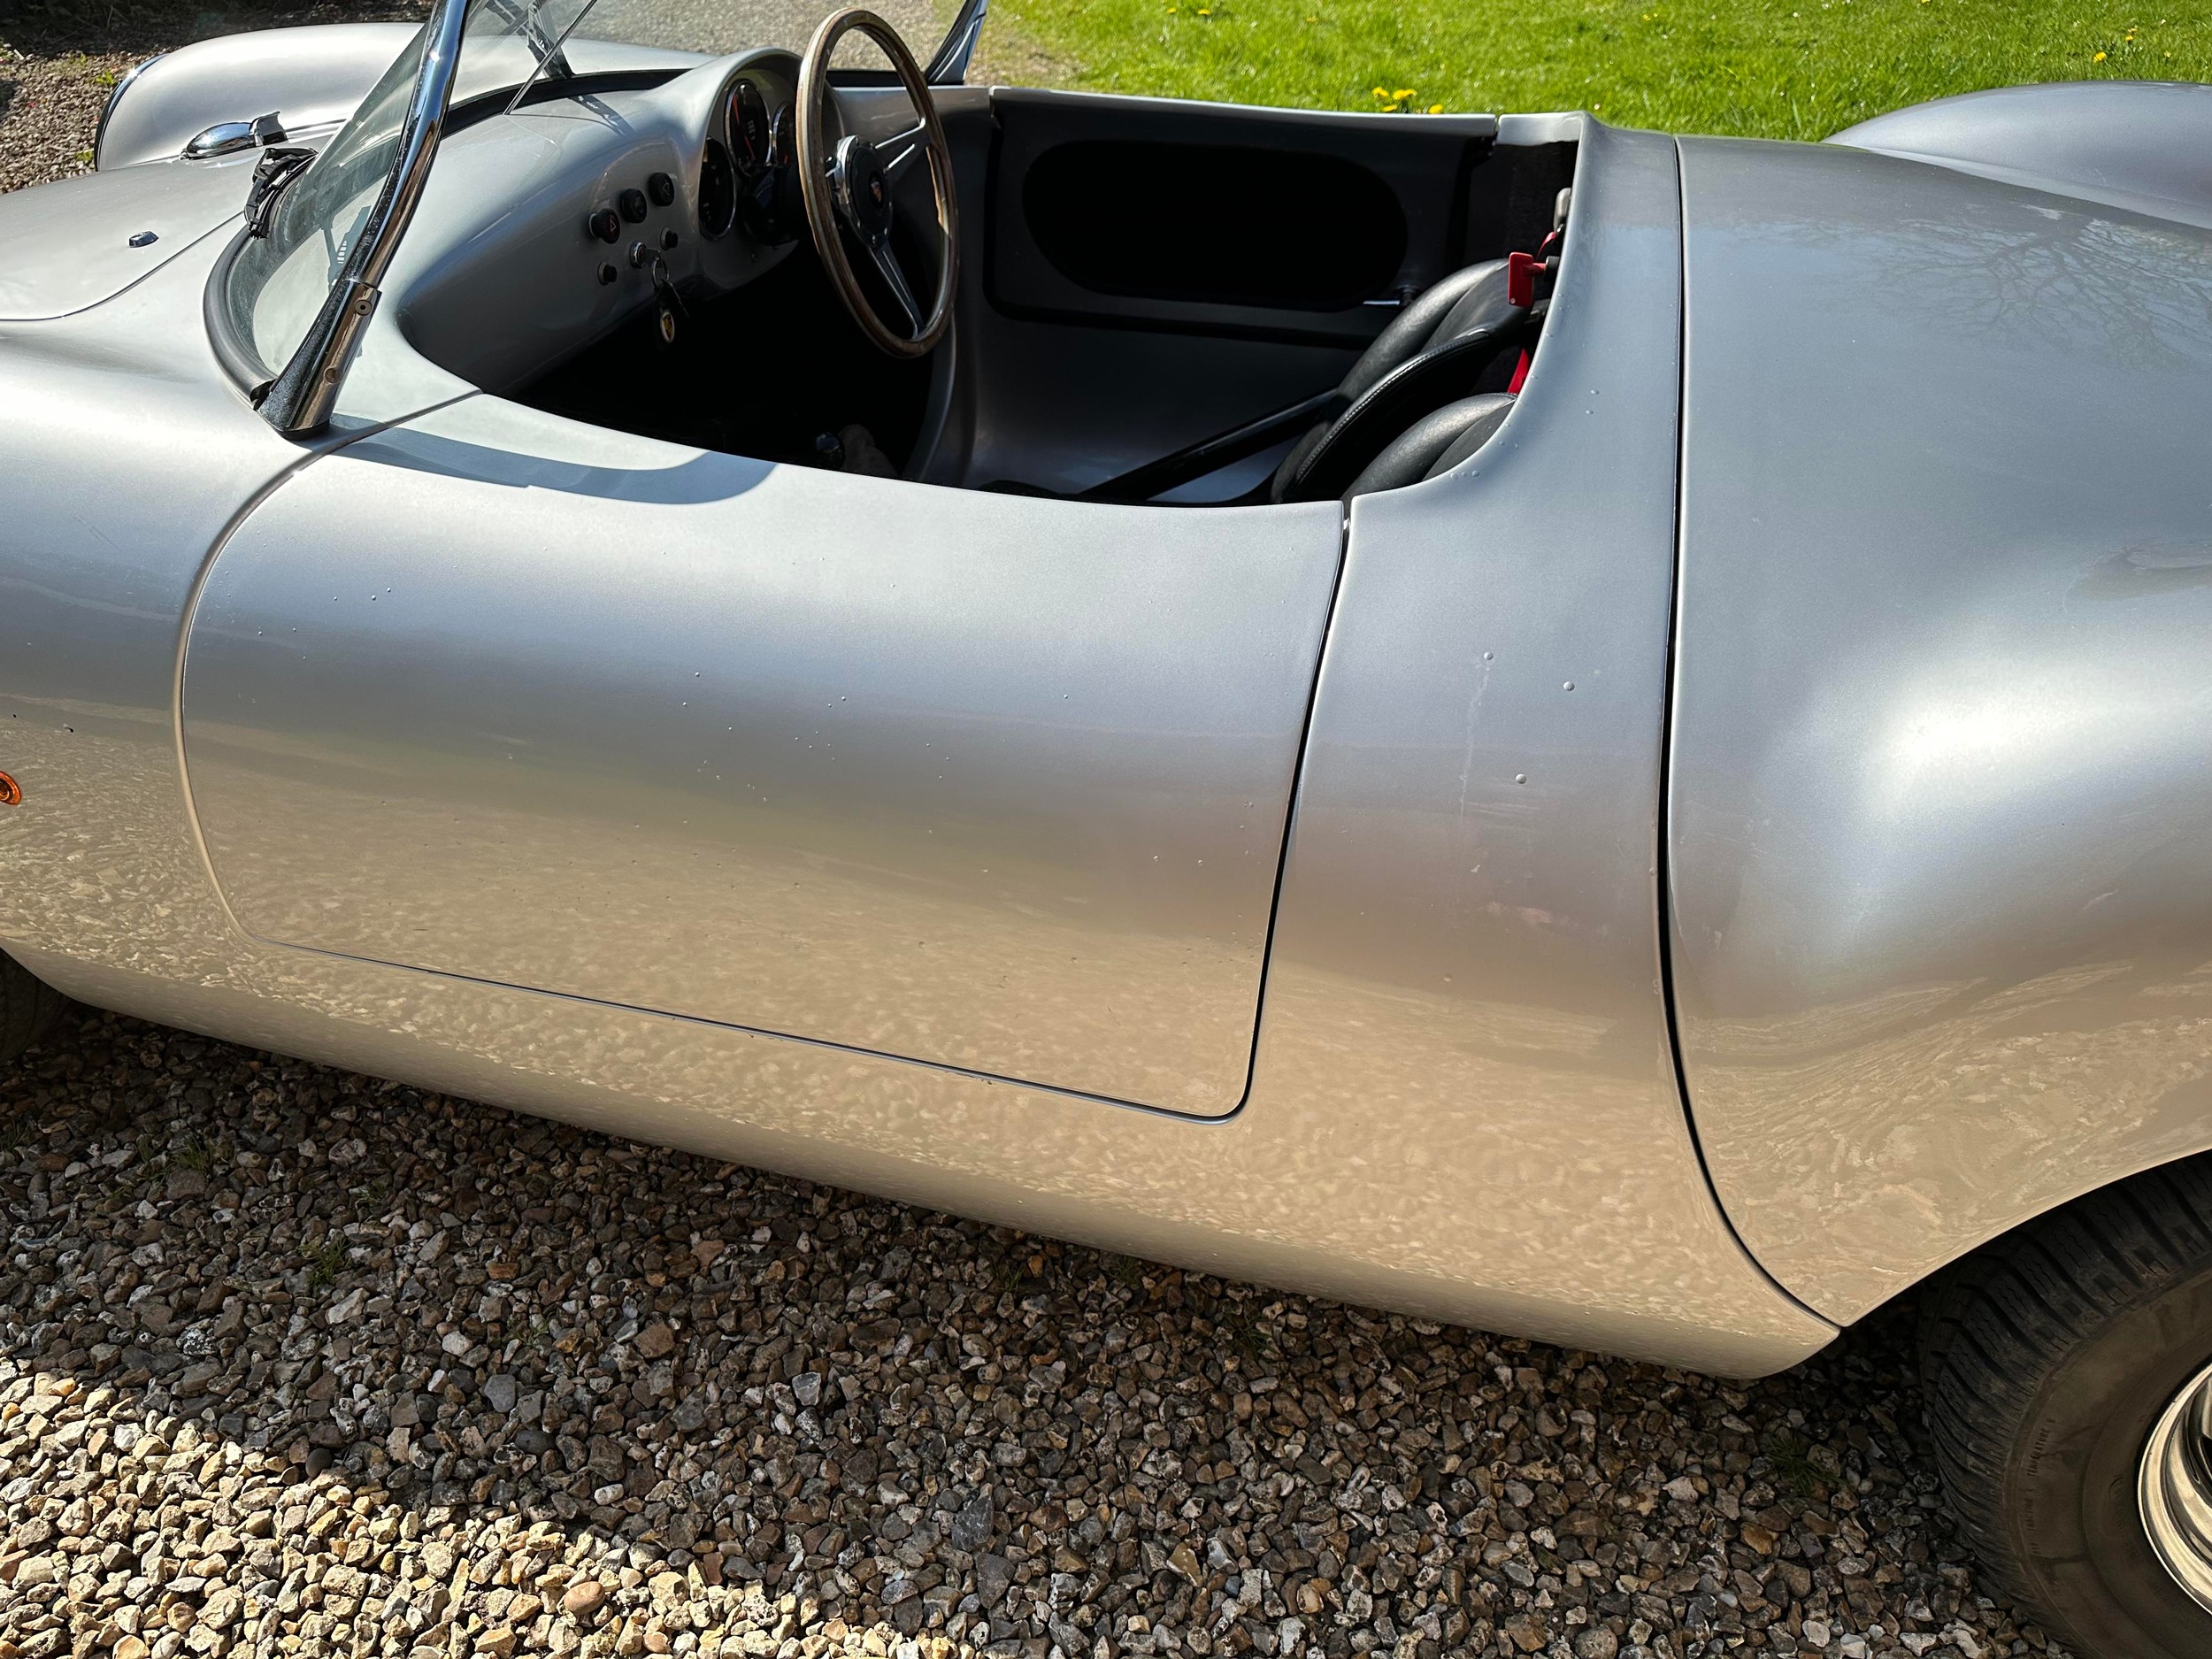 1996 TRAC Technic Porsche 550 Spyder Replica Registration Number Q260 ABL Metallic silver with a - Image 38 of 65